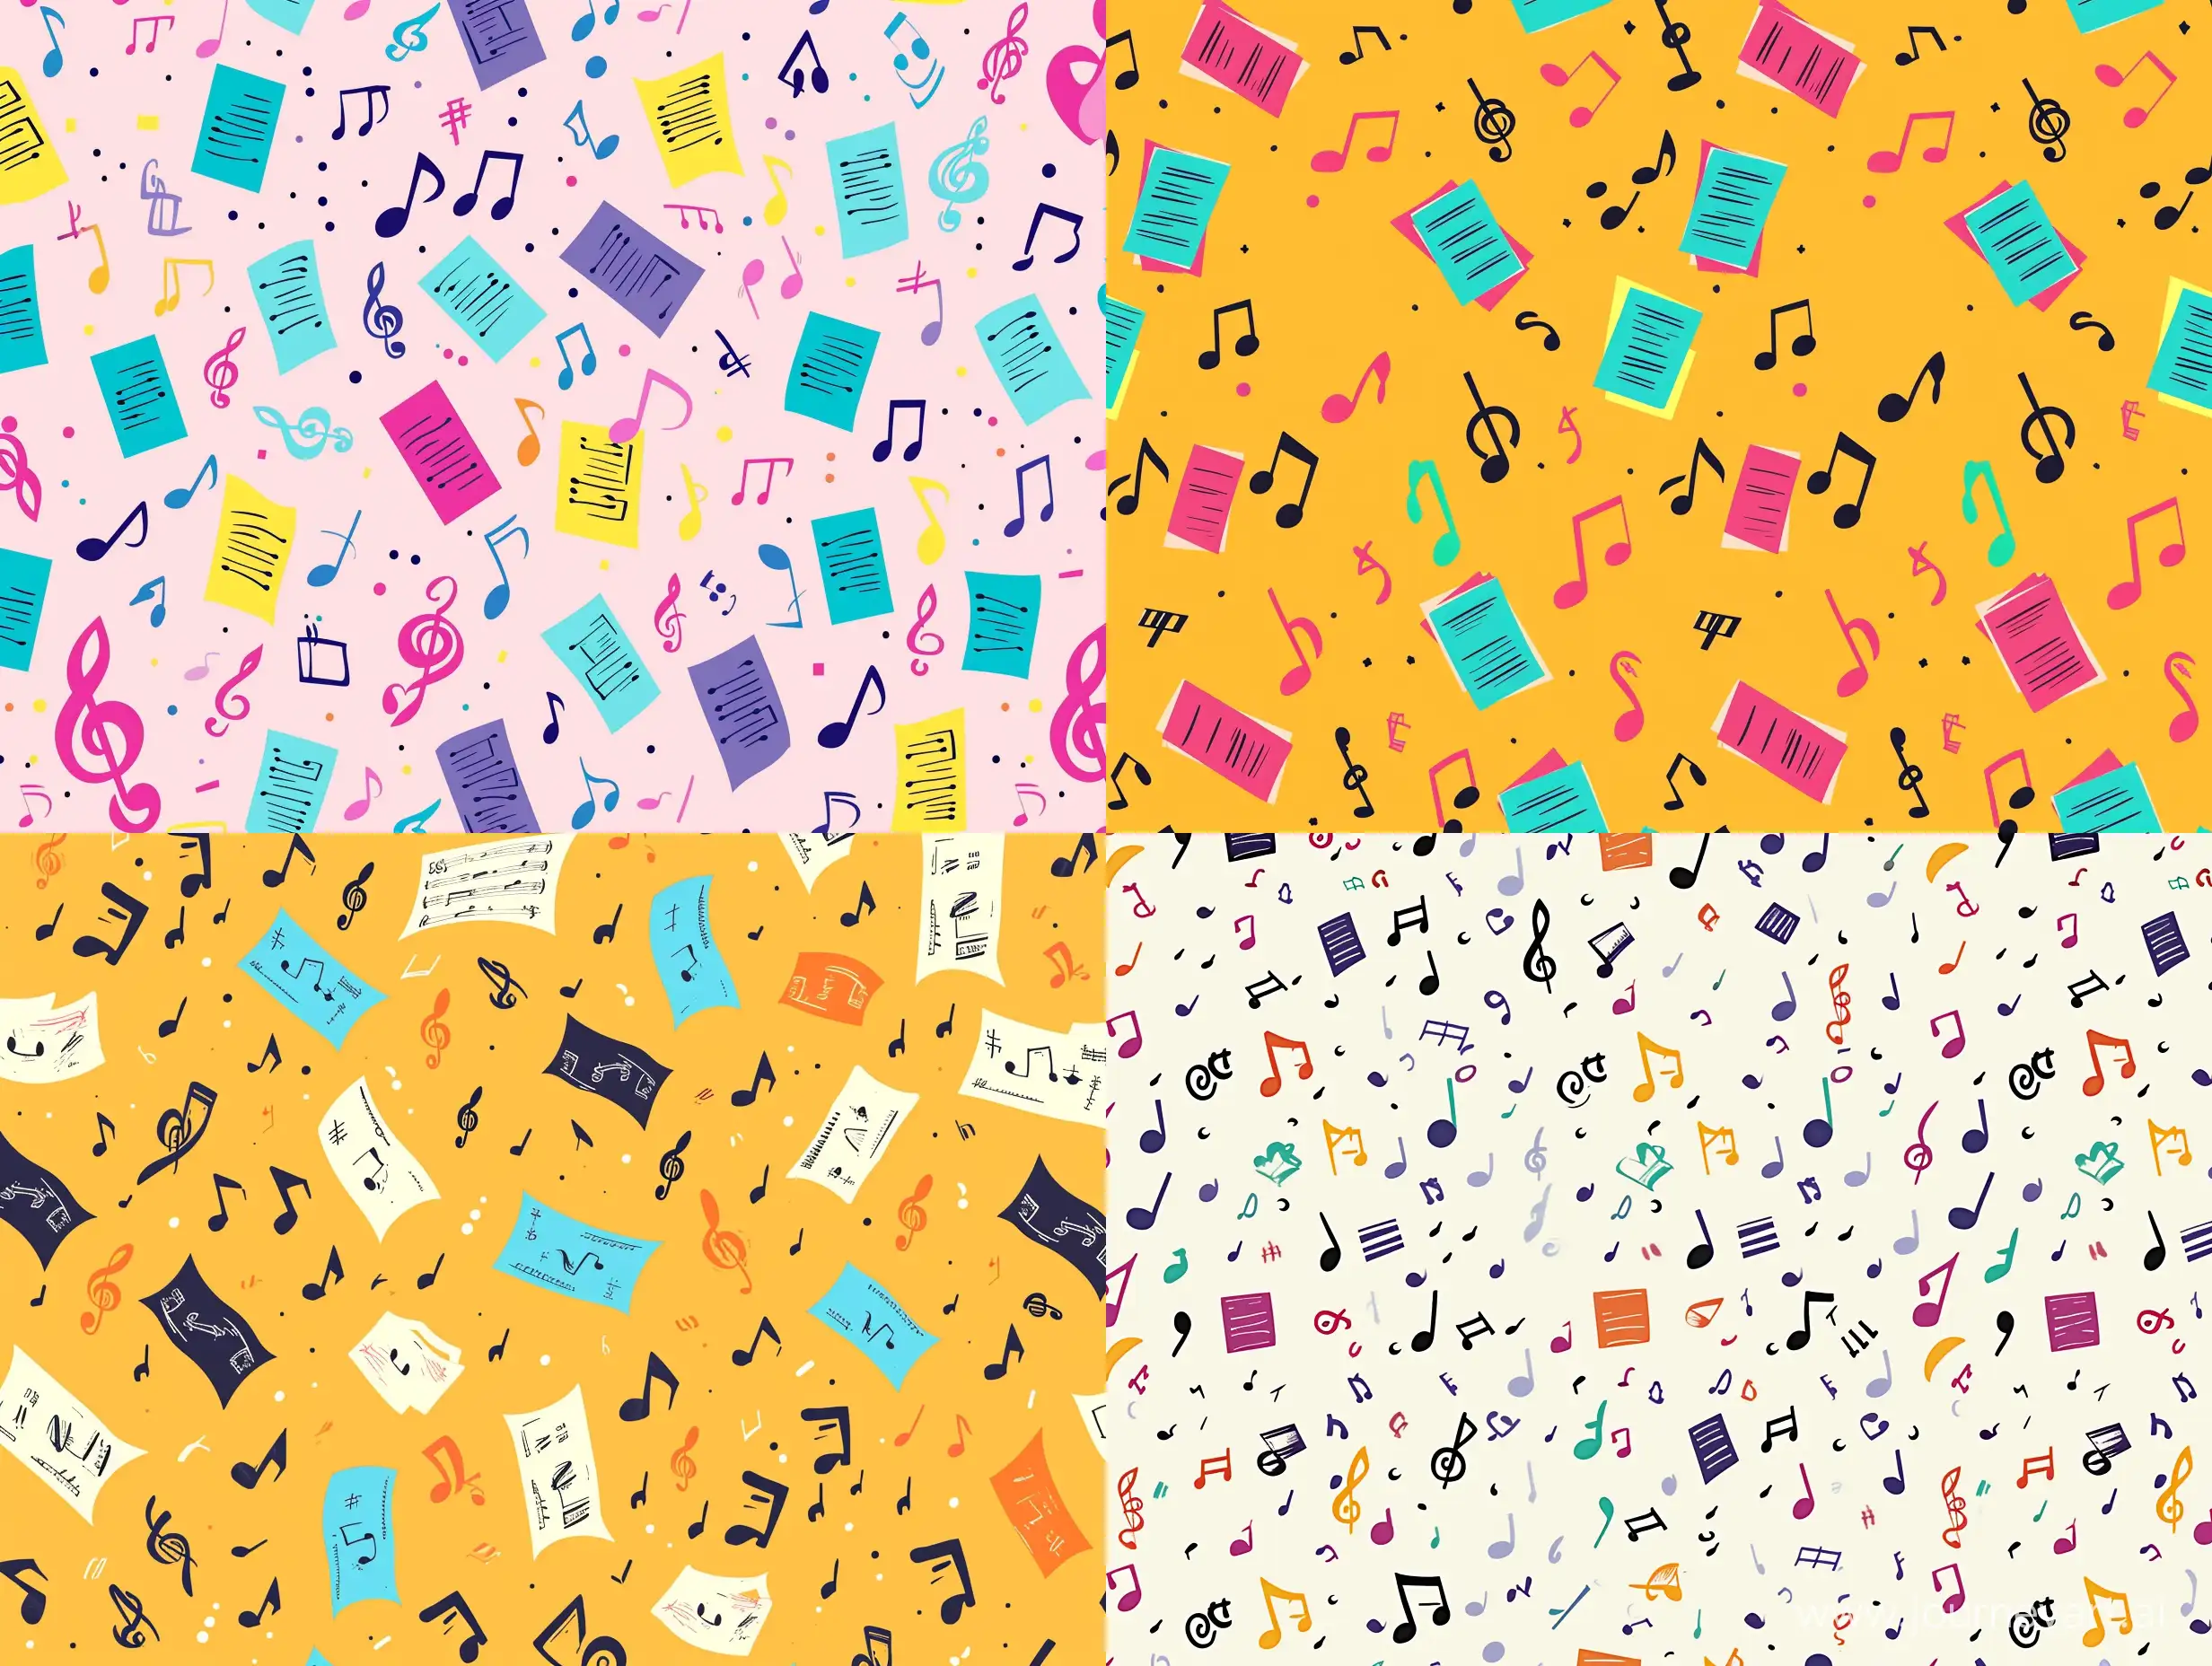 pattern of small notes, whole, eighth, sixteenth, same size, pop art style, caricature, cartoon style